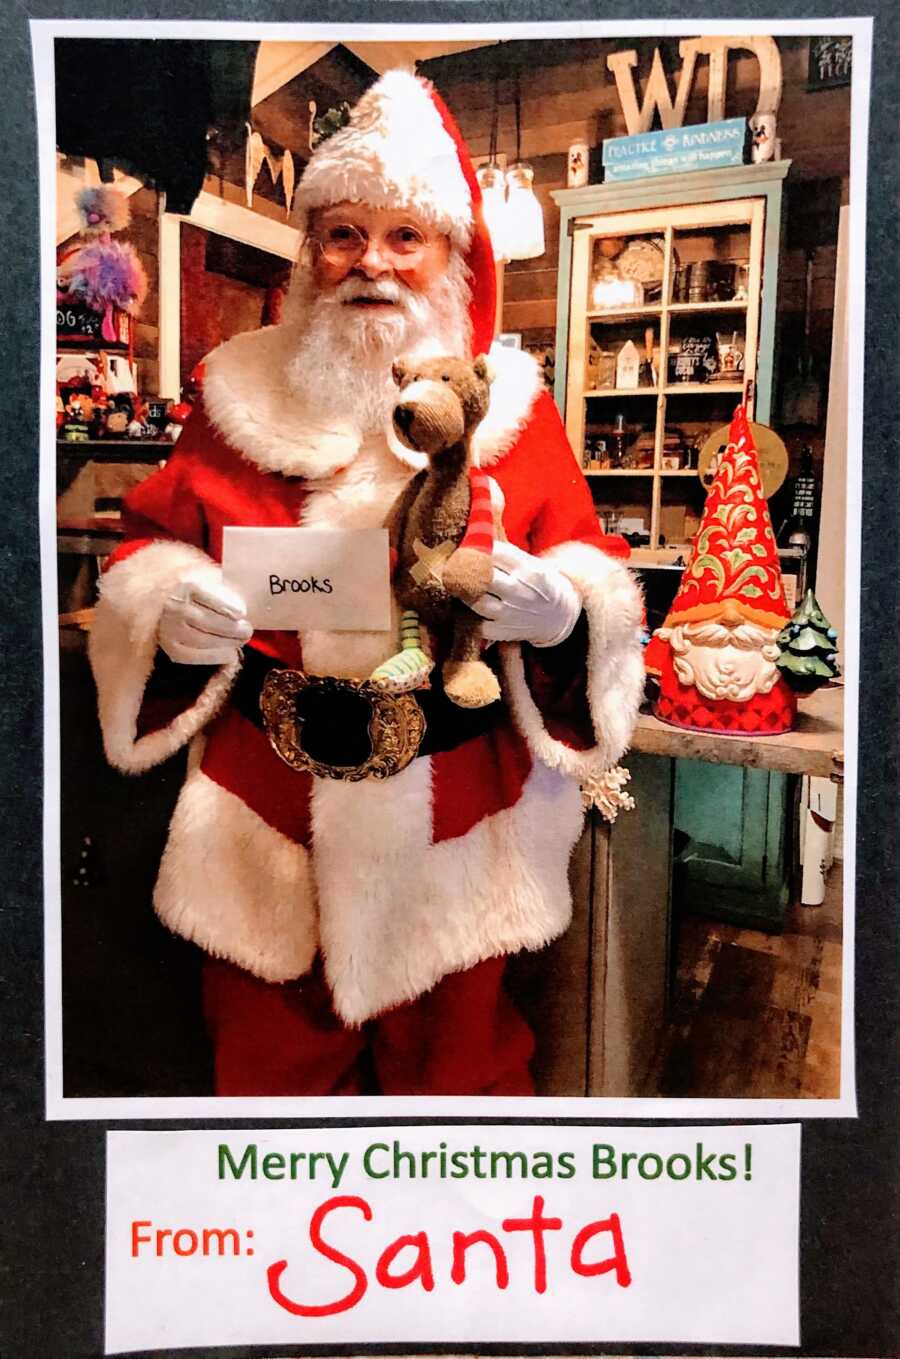 Santa holding a letter for a body named Brooks and a teddy bear as a Christmas gift 